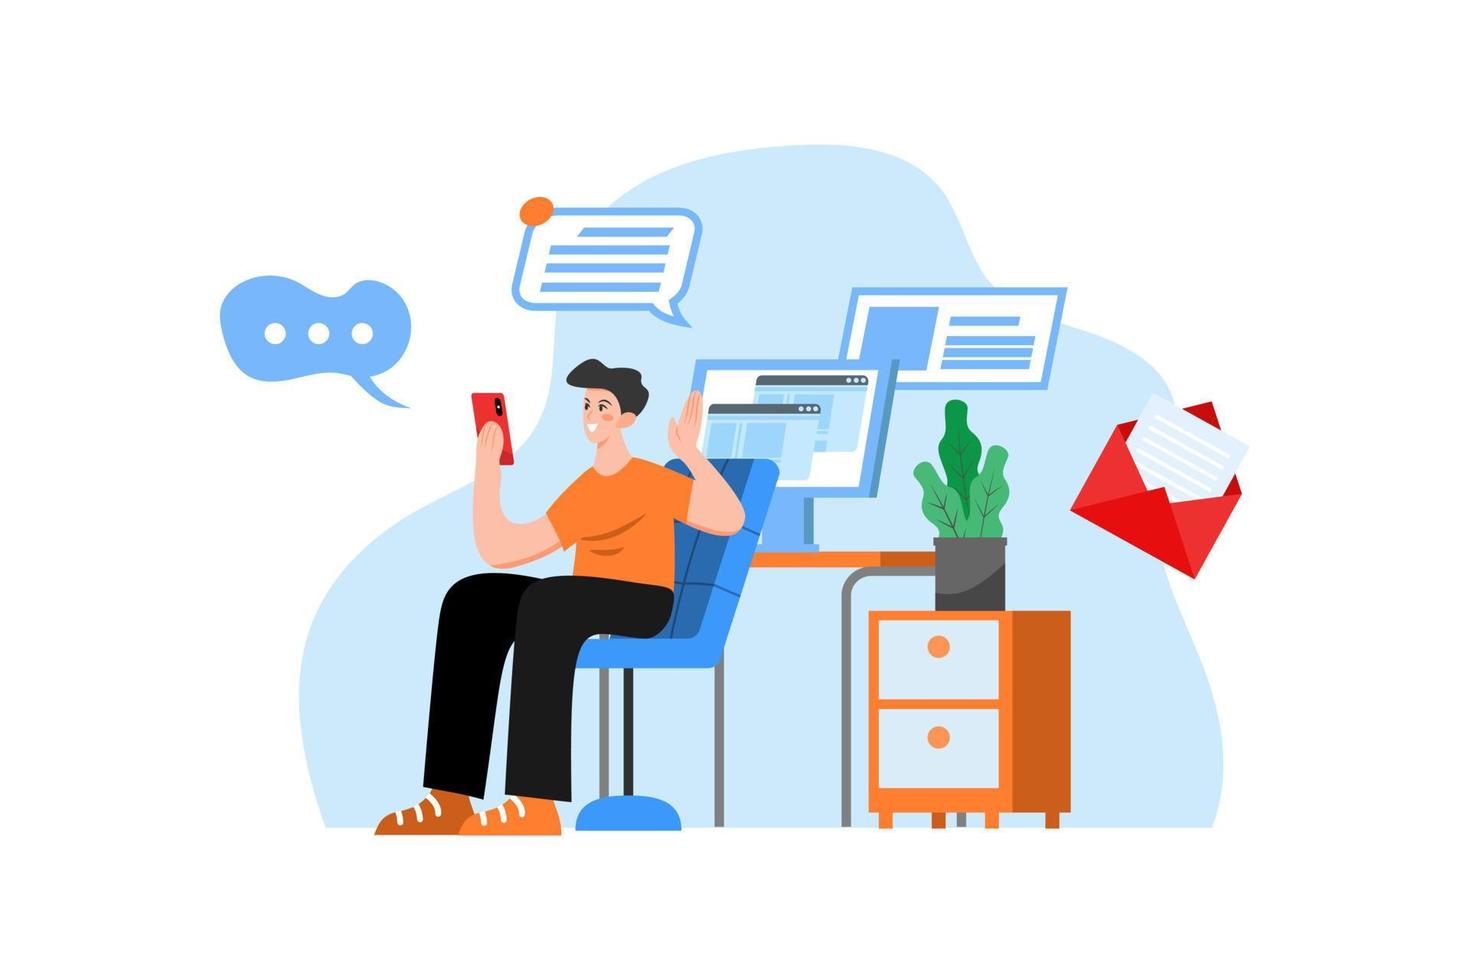 Man holding phone using social media with a computer in the background receiving notifications and emails vector